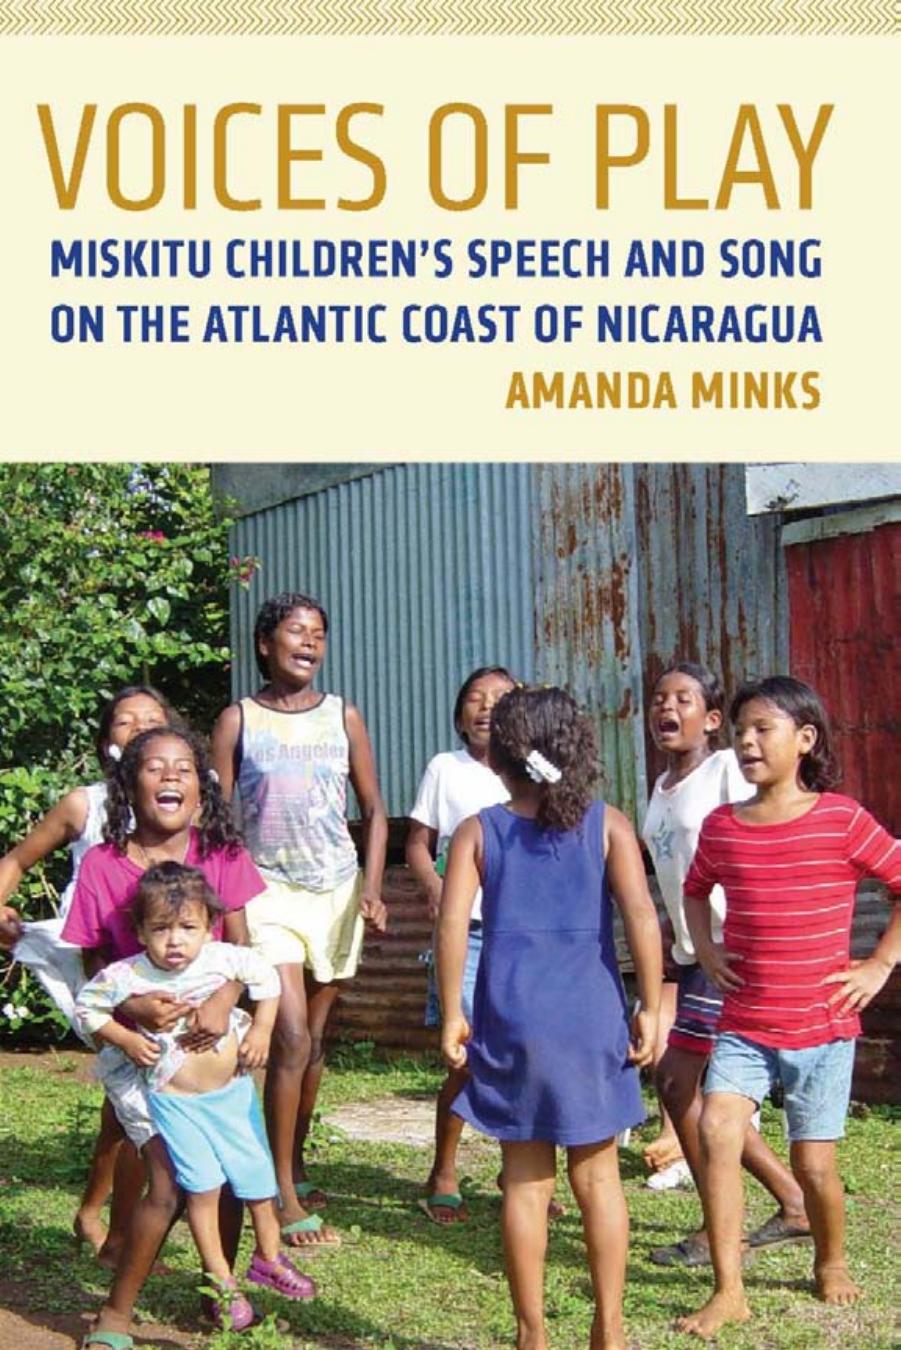 Voices of Play : Miskitu Children's Speech and Song on the Atlantic Coast of Nicaragua by Amanda Minks